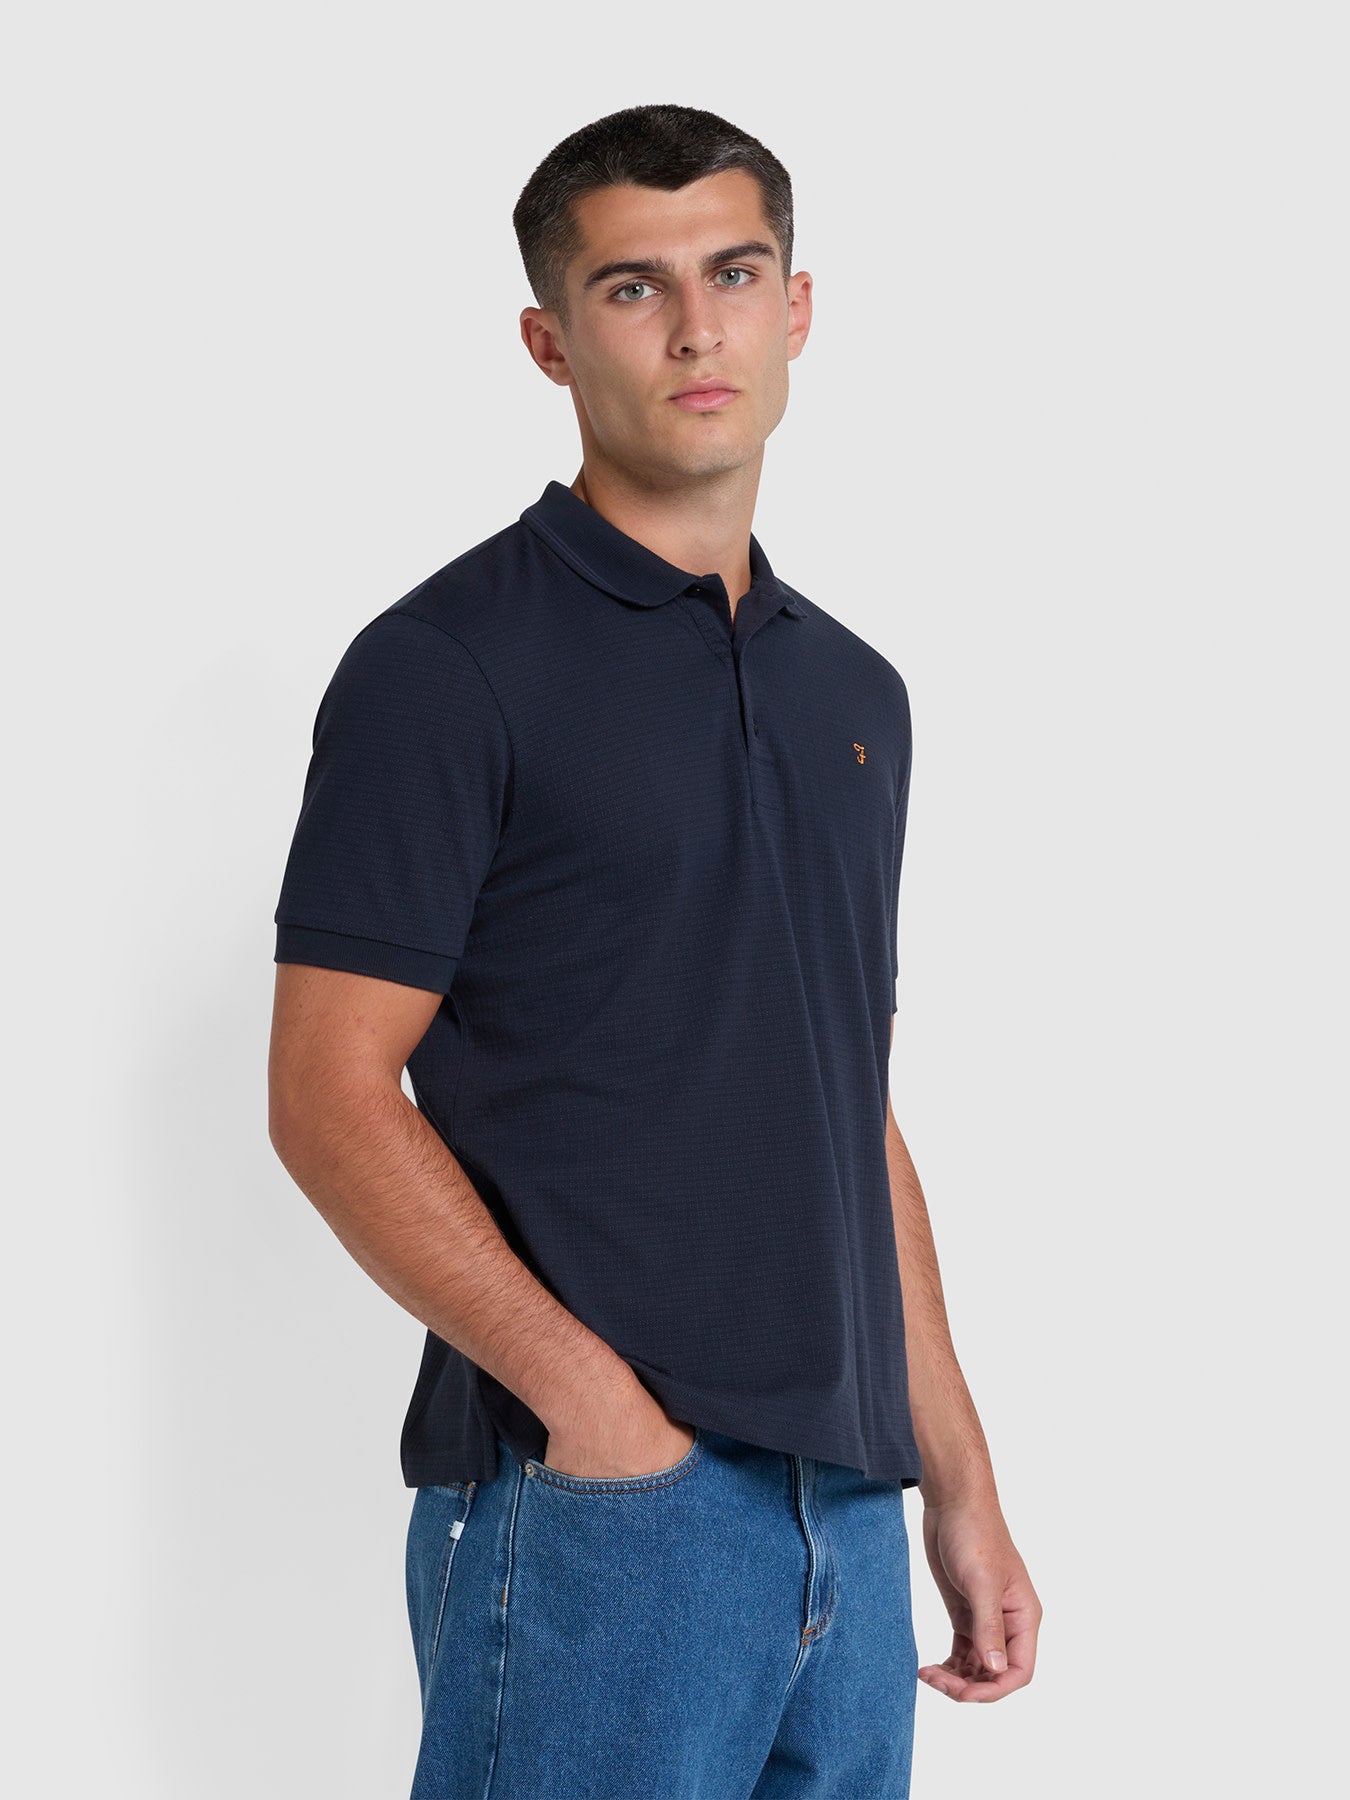 View Volo Organic Cotton Textured Polo Shirt In True Navy information